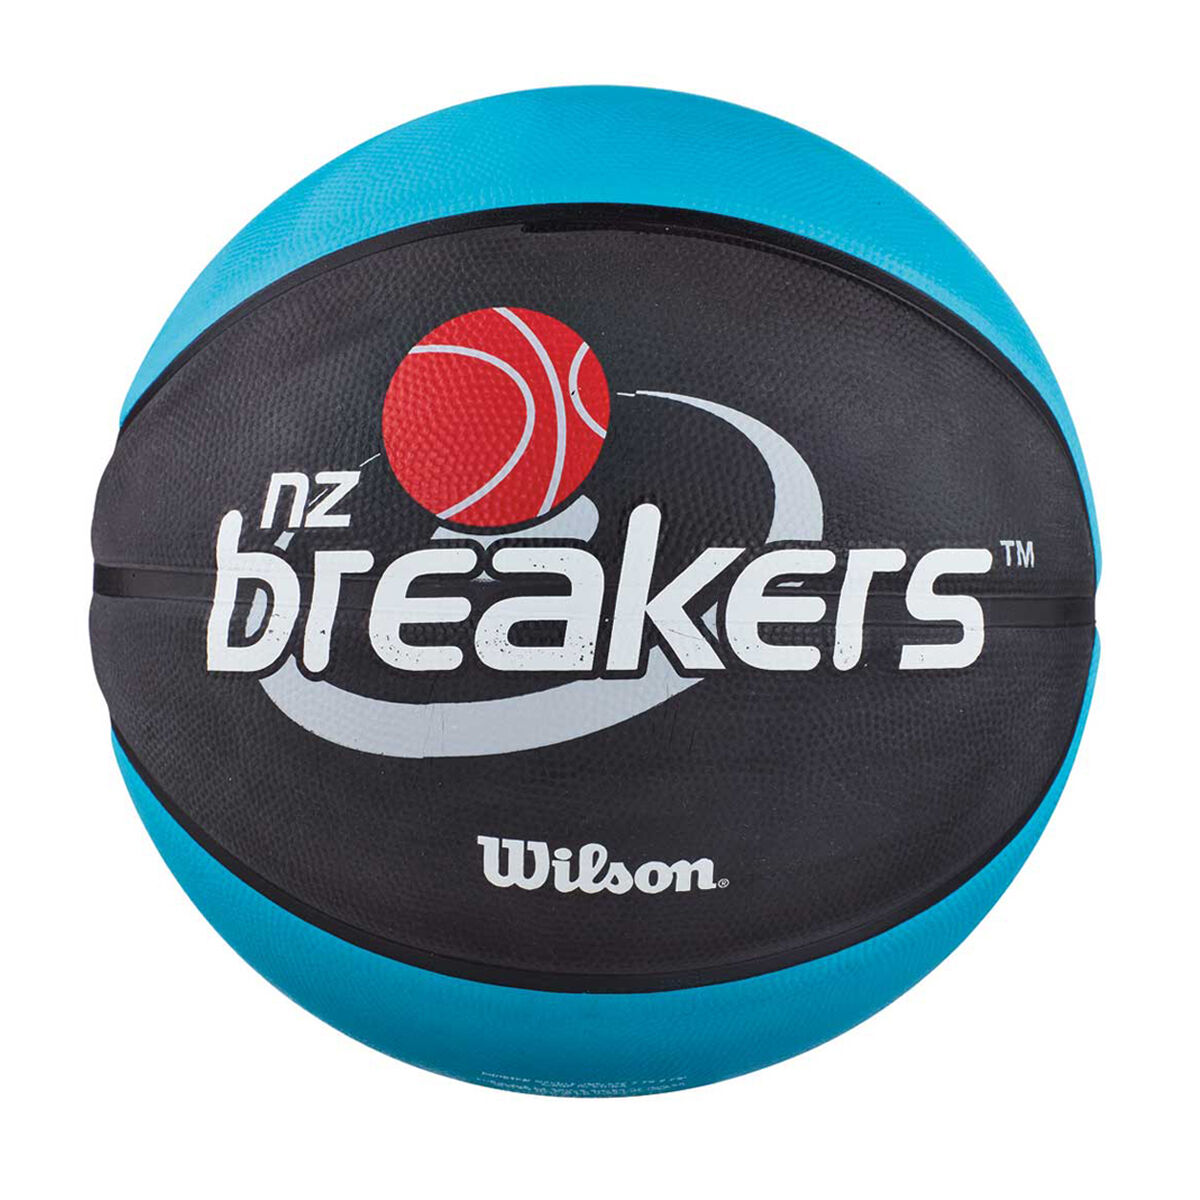 Deflated Details about   Wilson NBL NZ Breakers Rubber Basketball Size 7 